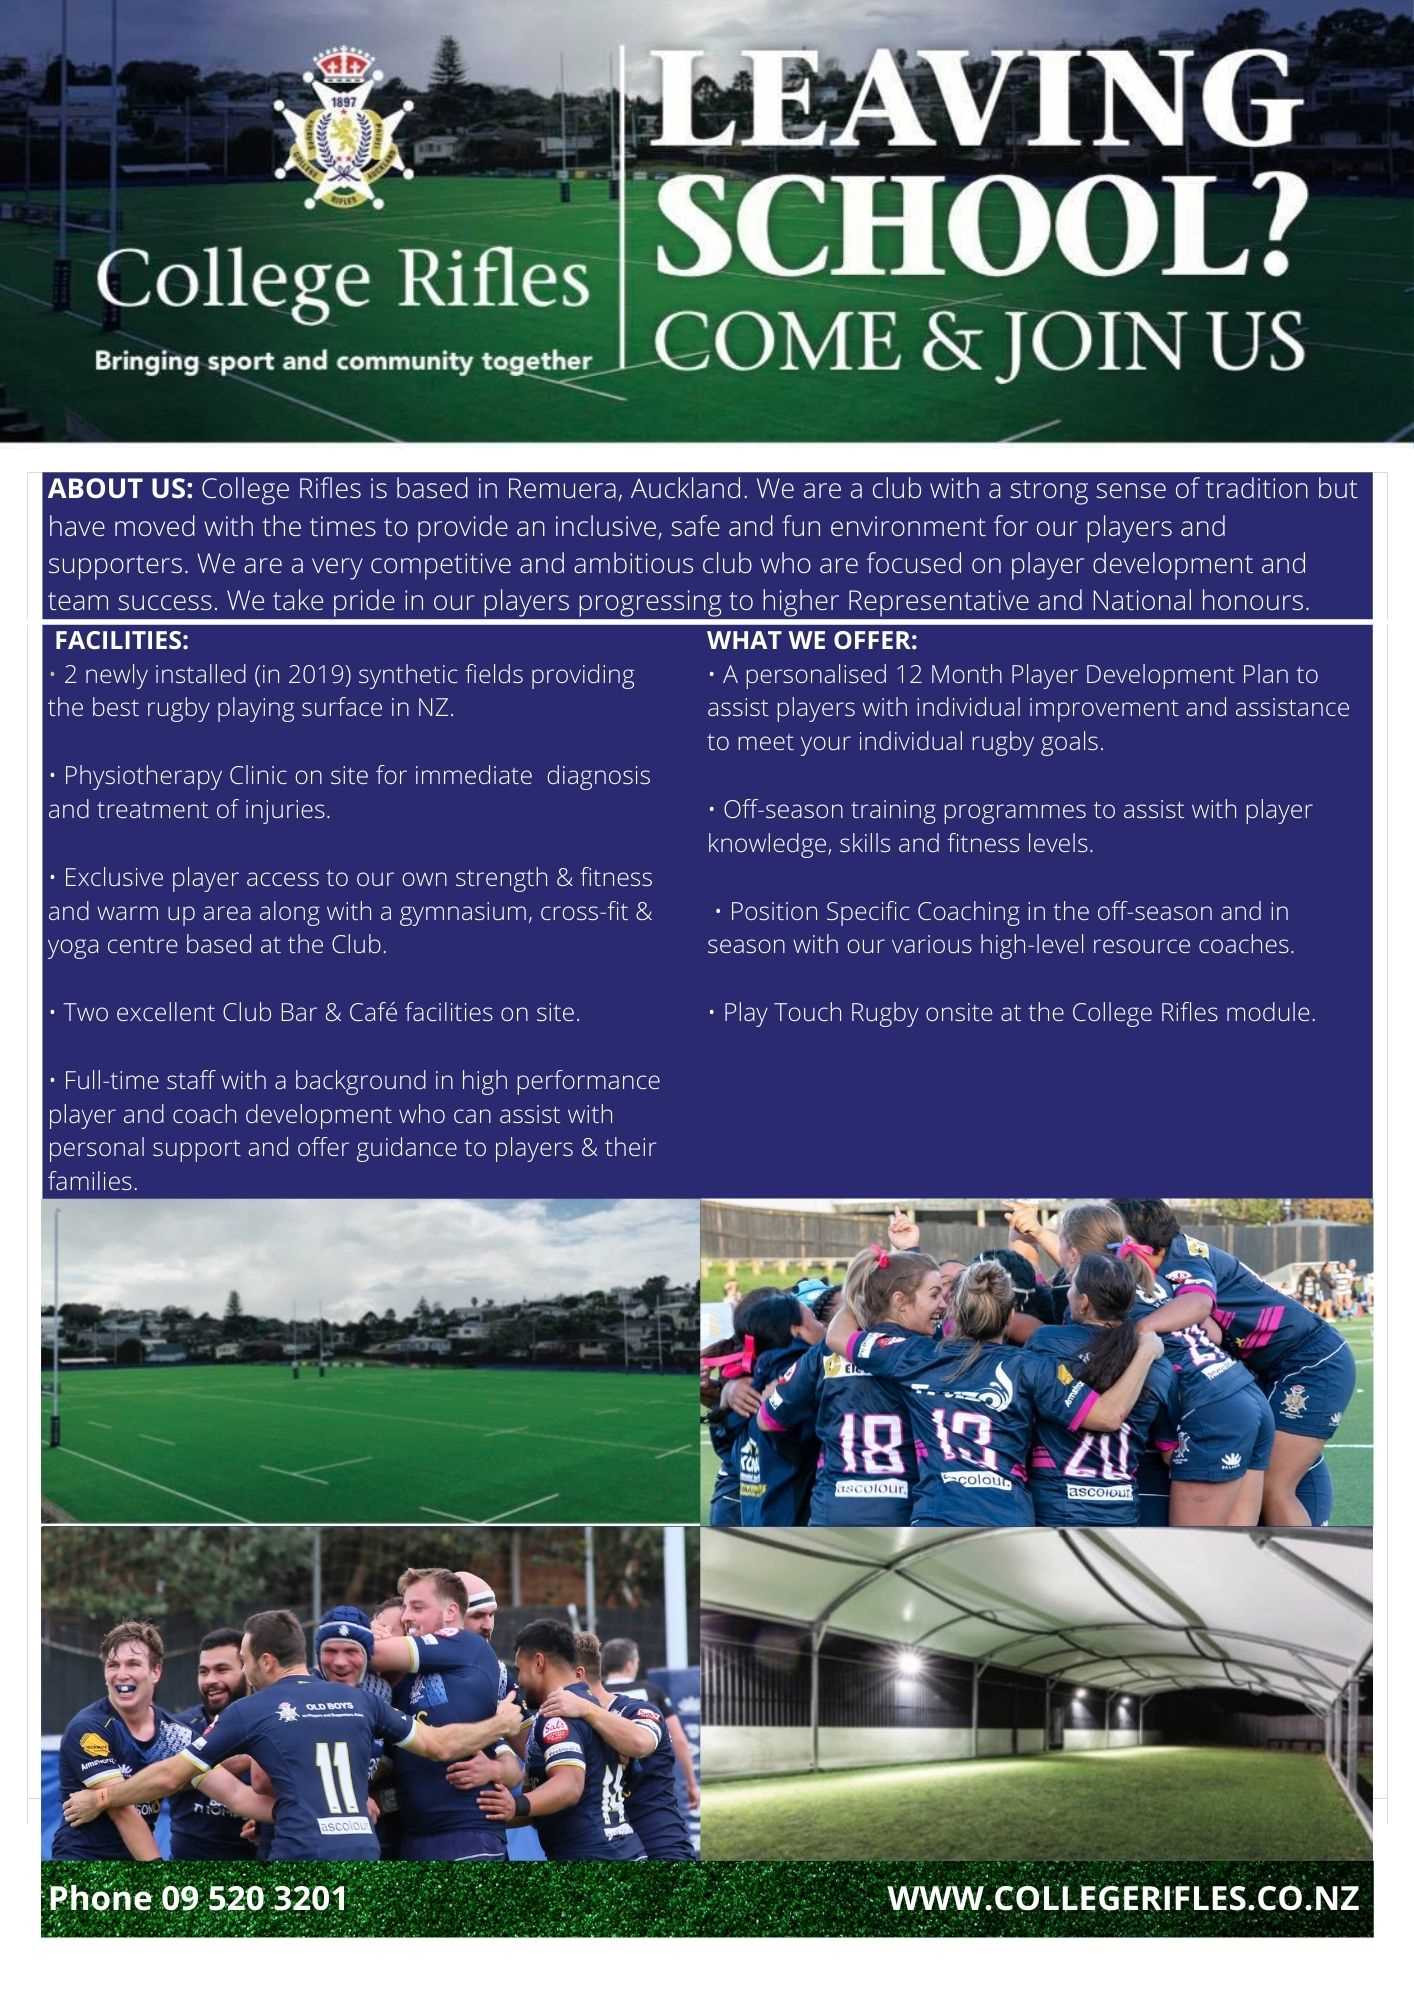 ABOUT US: College Rifles is based in Remuera, Auckland. We are a club with a strong sense of tradition but have moved with the times to provide an inclusive, safe and fun environment for our players and supporters. We are a very competitive and ambitious